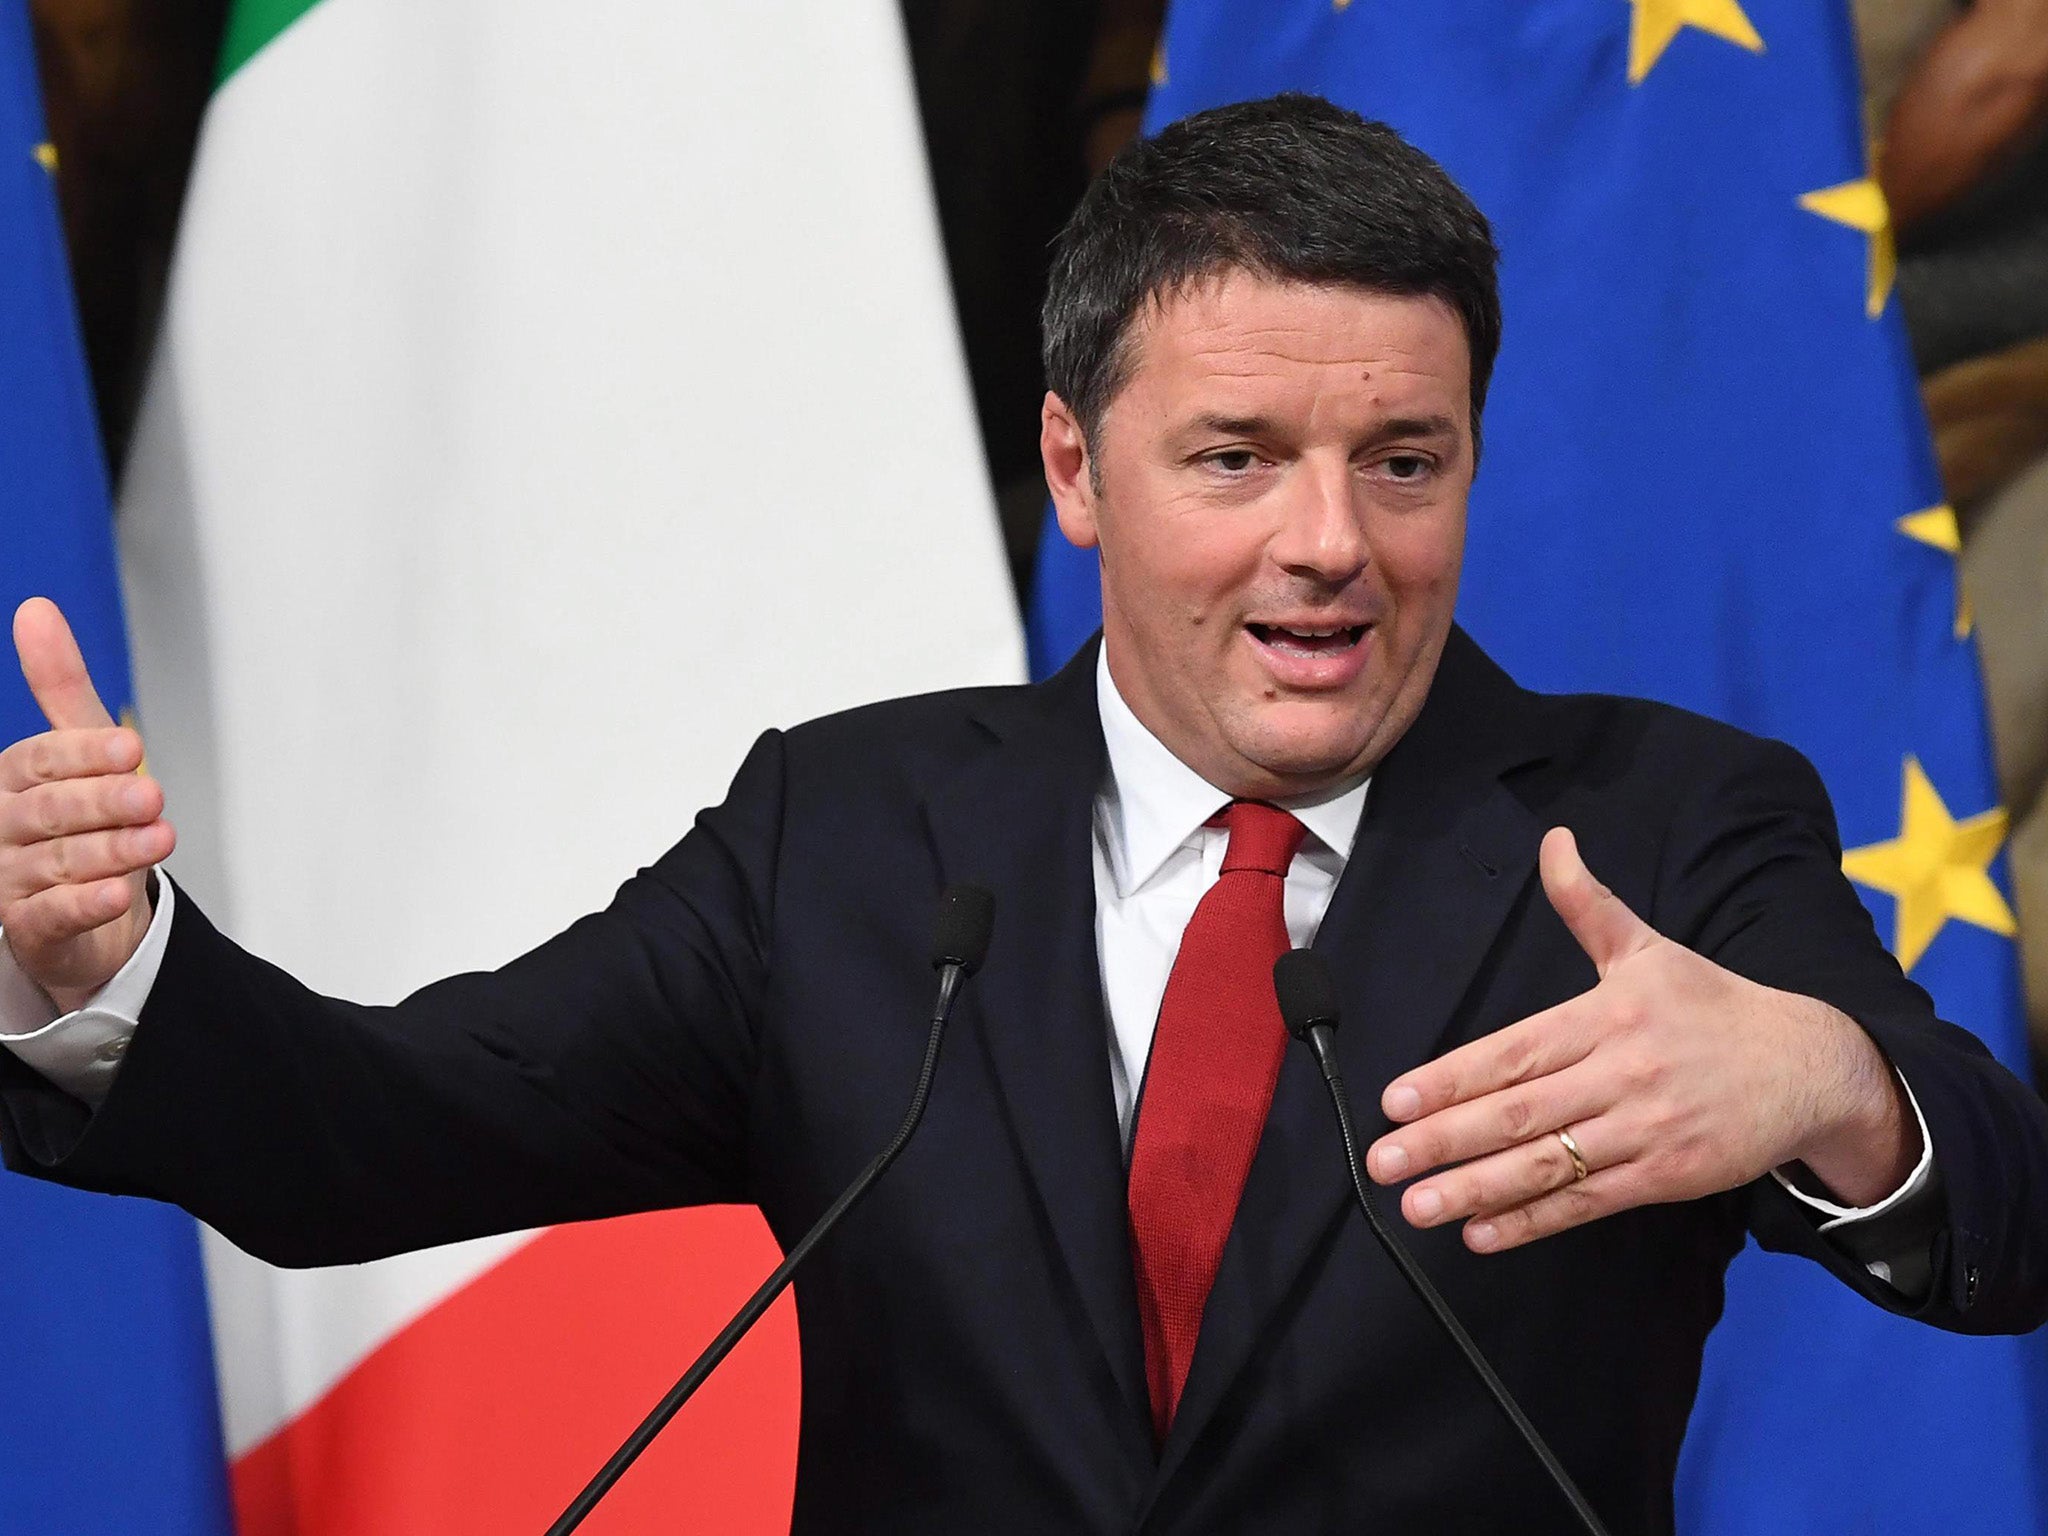 Matteo Renzi is expected to resign if his reforms are rejected in Italy's referendum